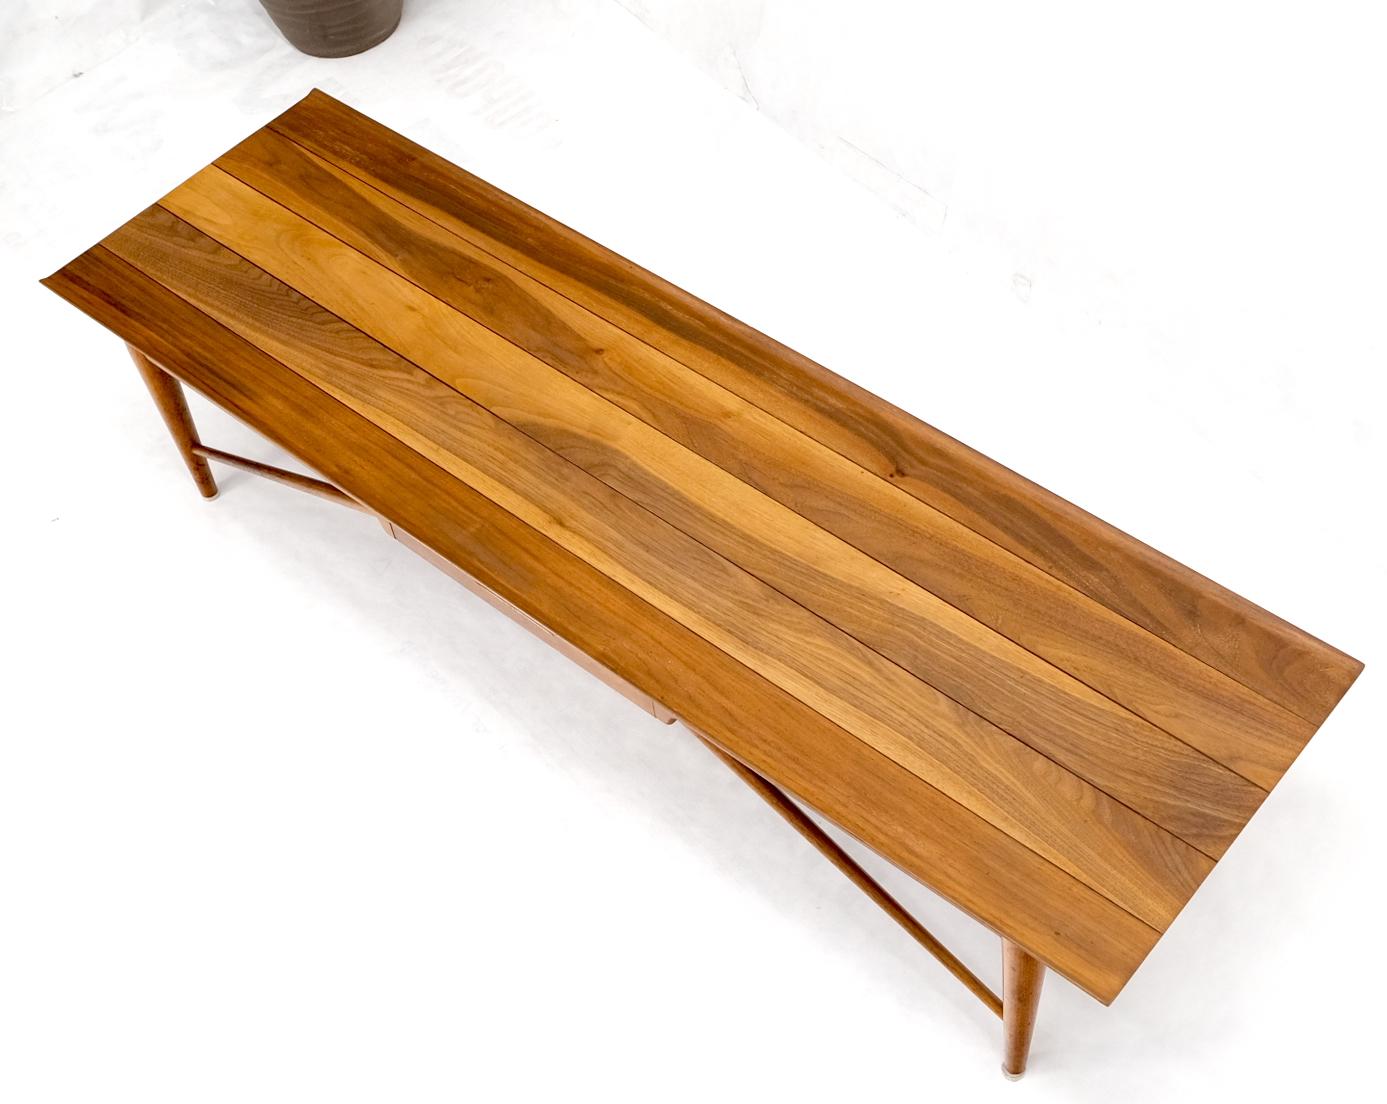 Mid-Century Modern stunning solid walnut grain long bench coffee table with rolled edges and one drawer similar to Edward Wormley for Dunbar bench.